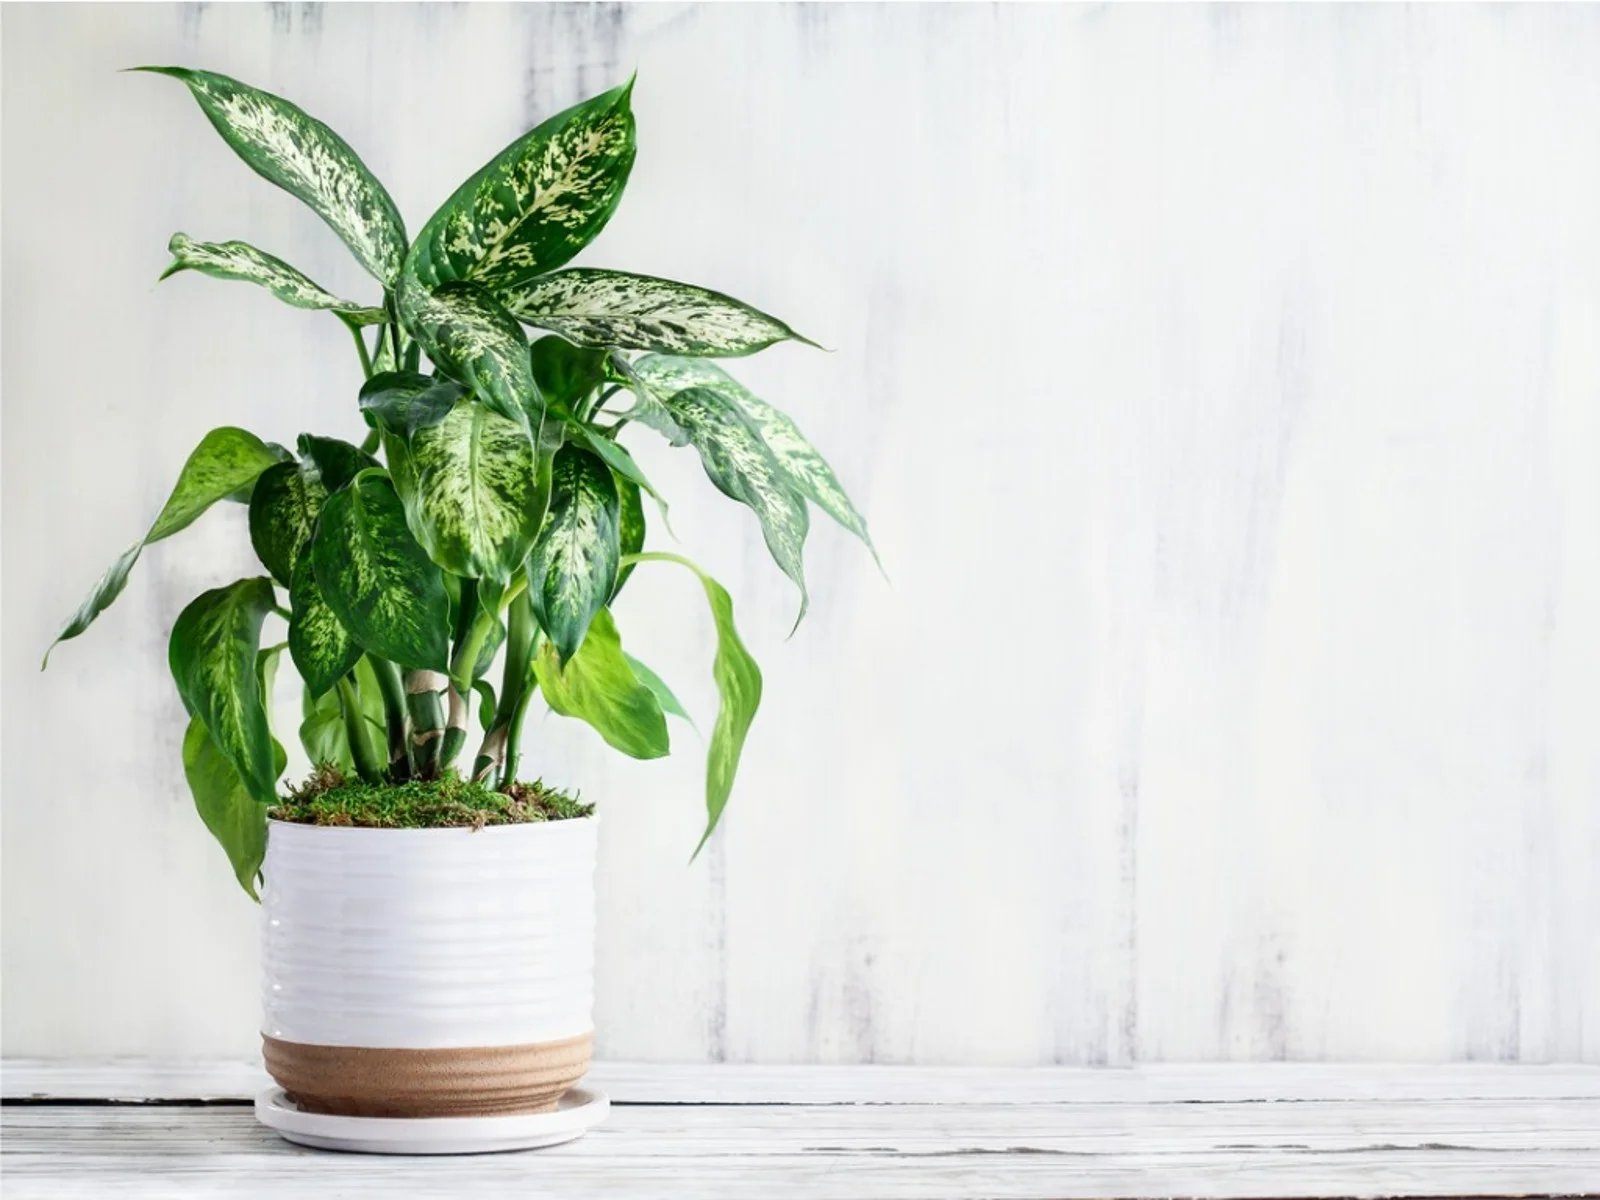 How To Care For Dieffenbachia Plant